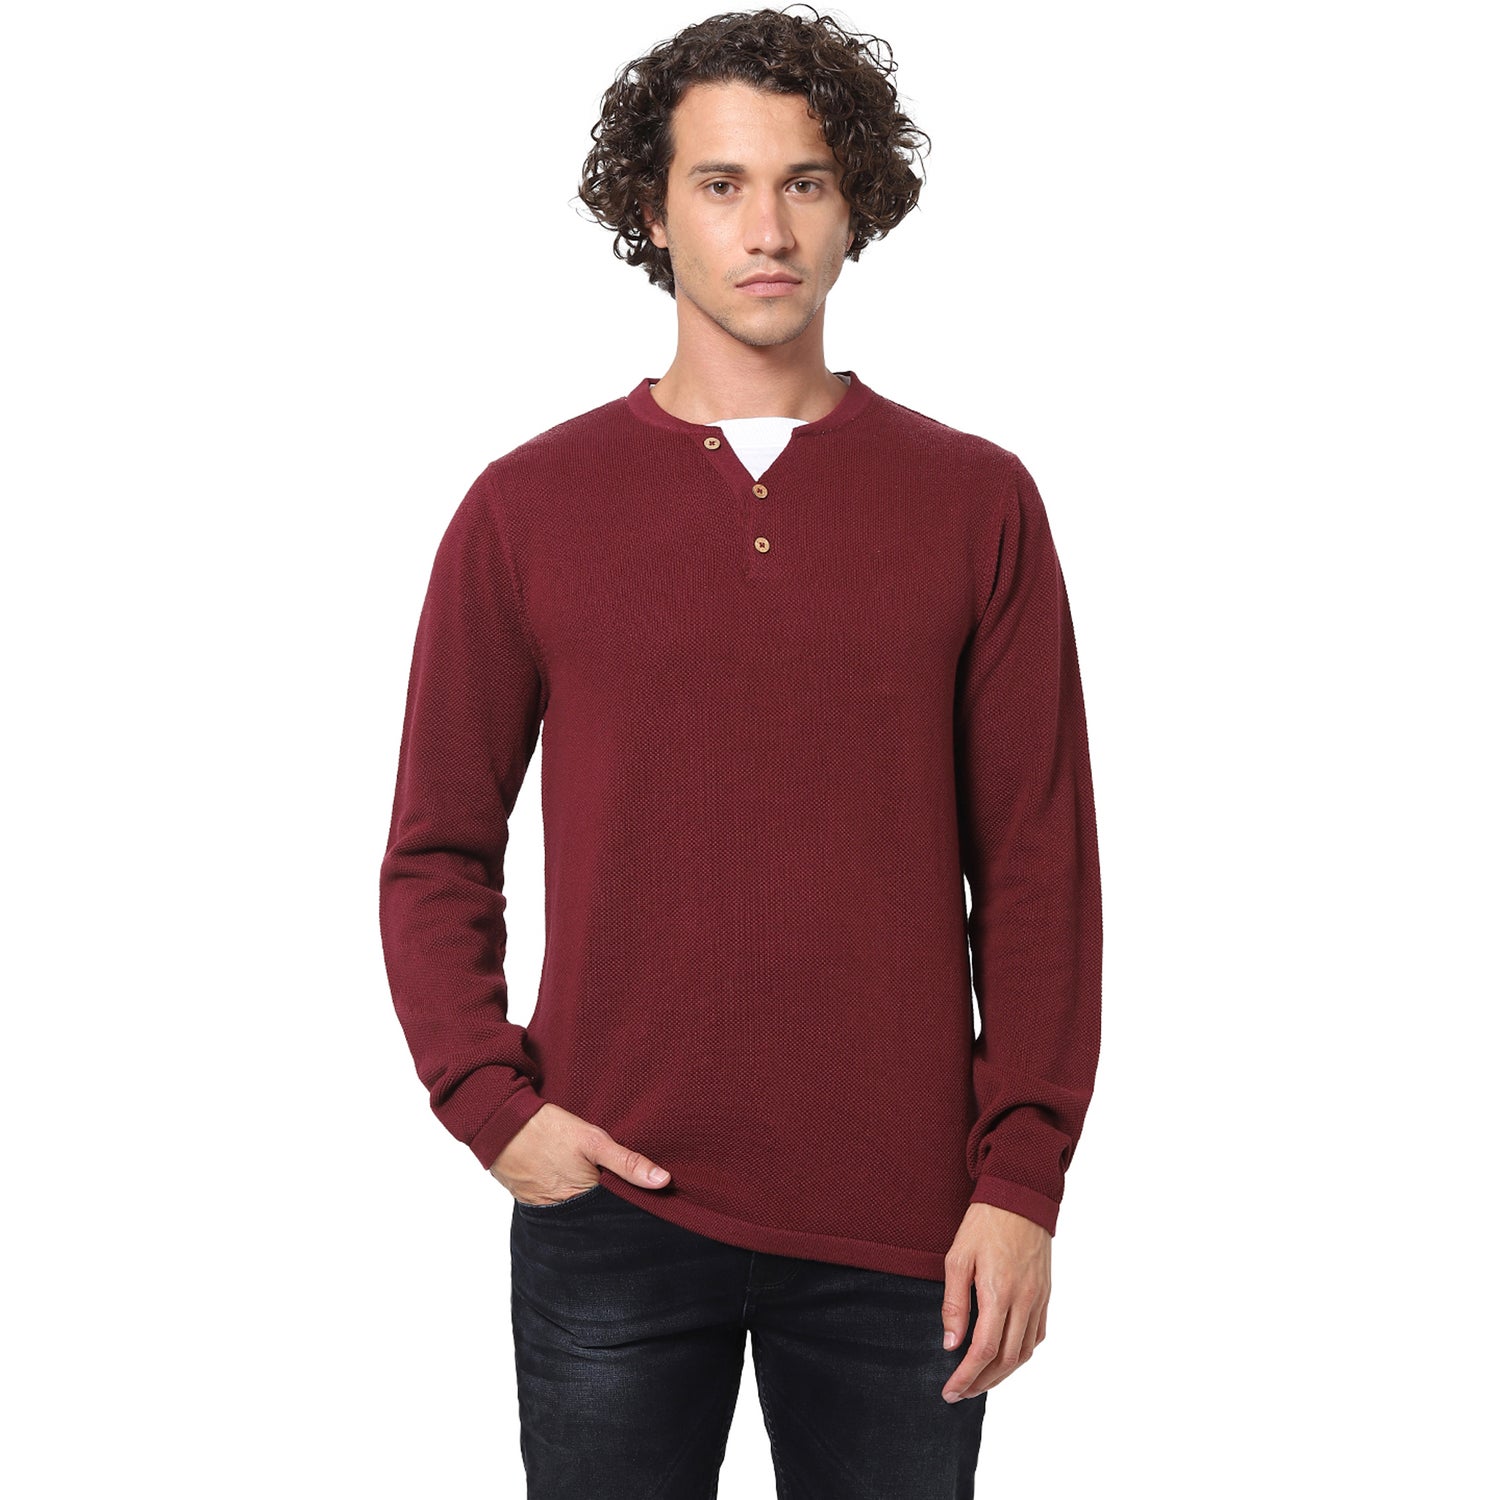 Burgundy V-Neck Solid Sweaters (TECHILLPIC)